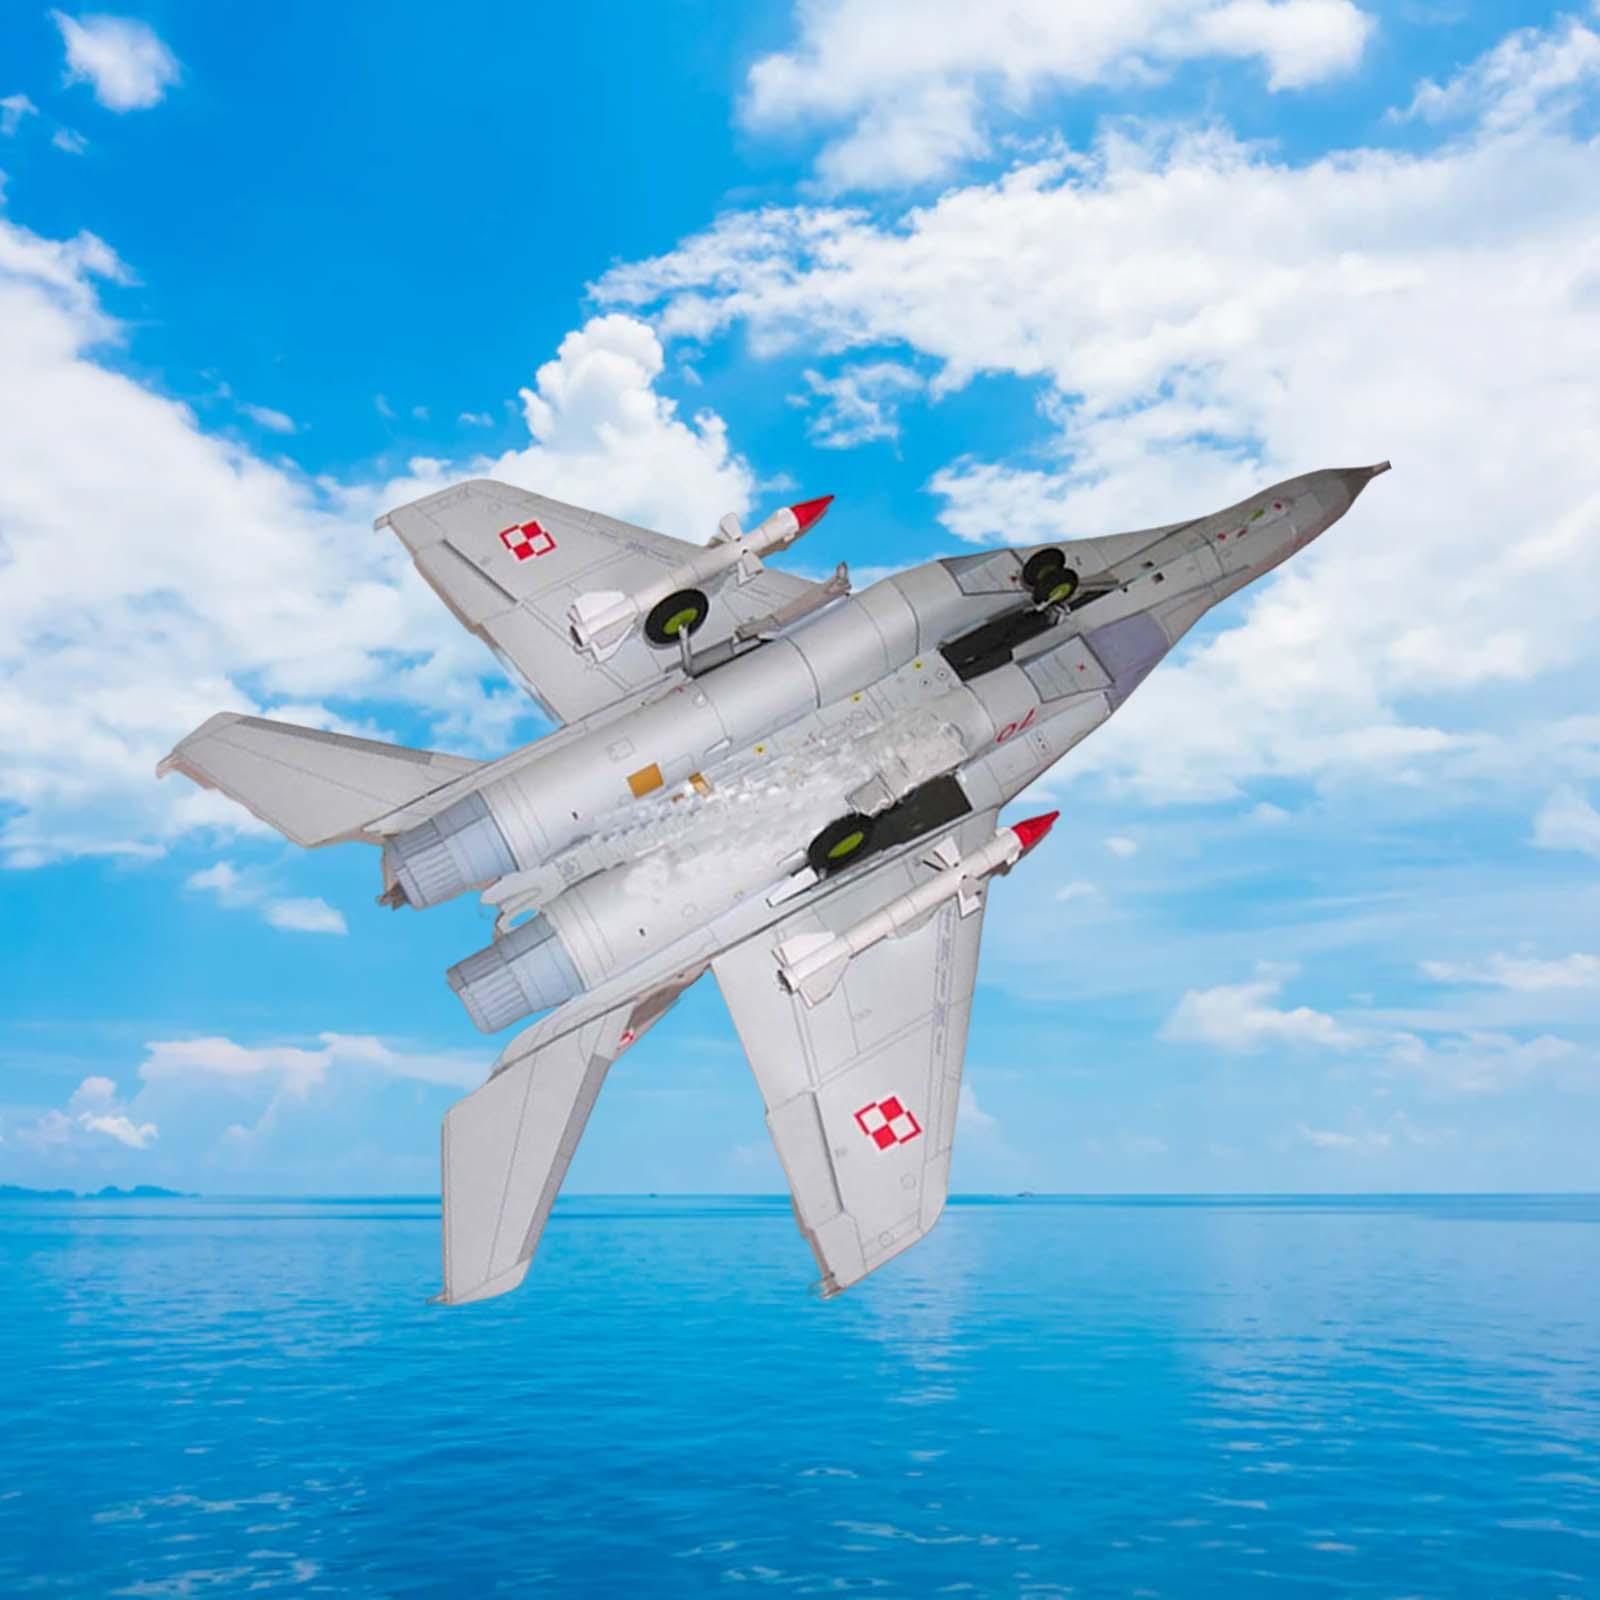 Paper Russian Plane Model Collectables Ornaments Puzzle Toy DIY Display Ornaments for Shelf Office Ornament